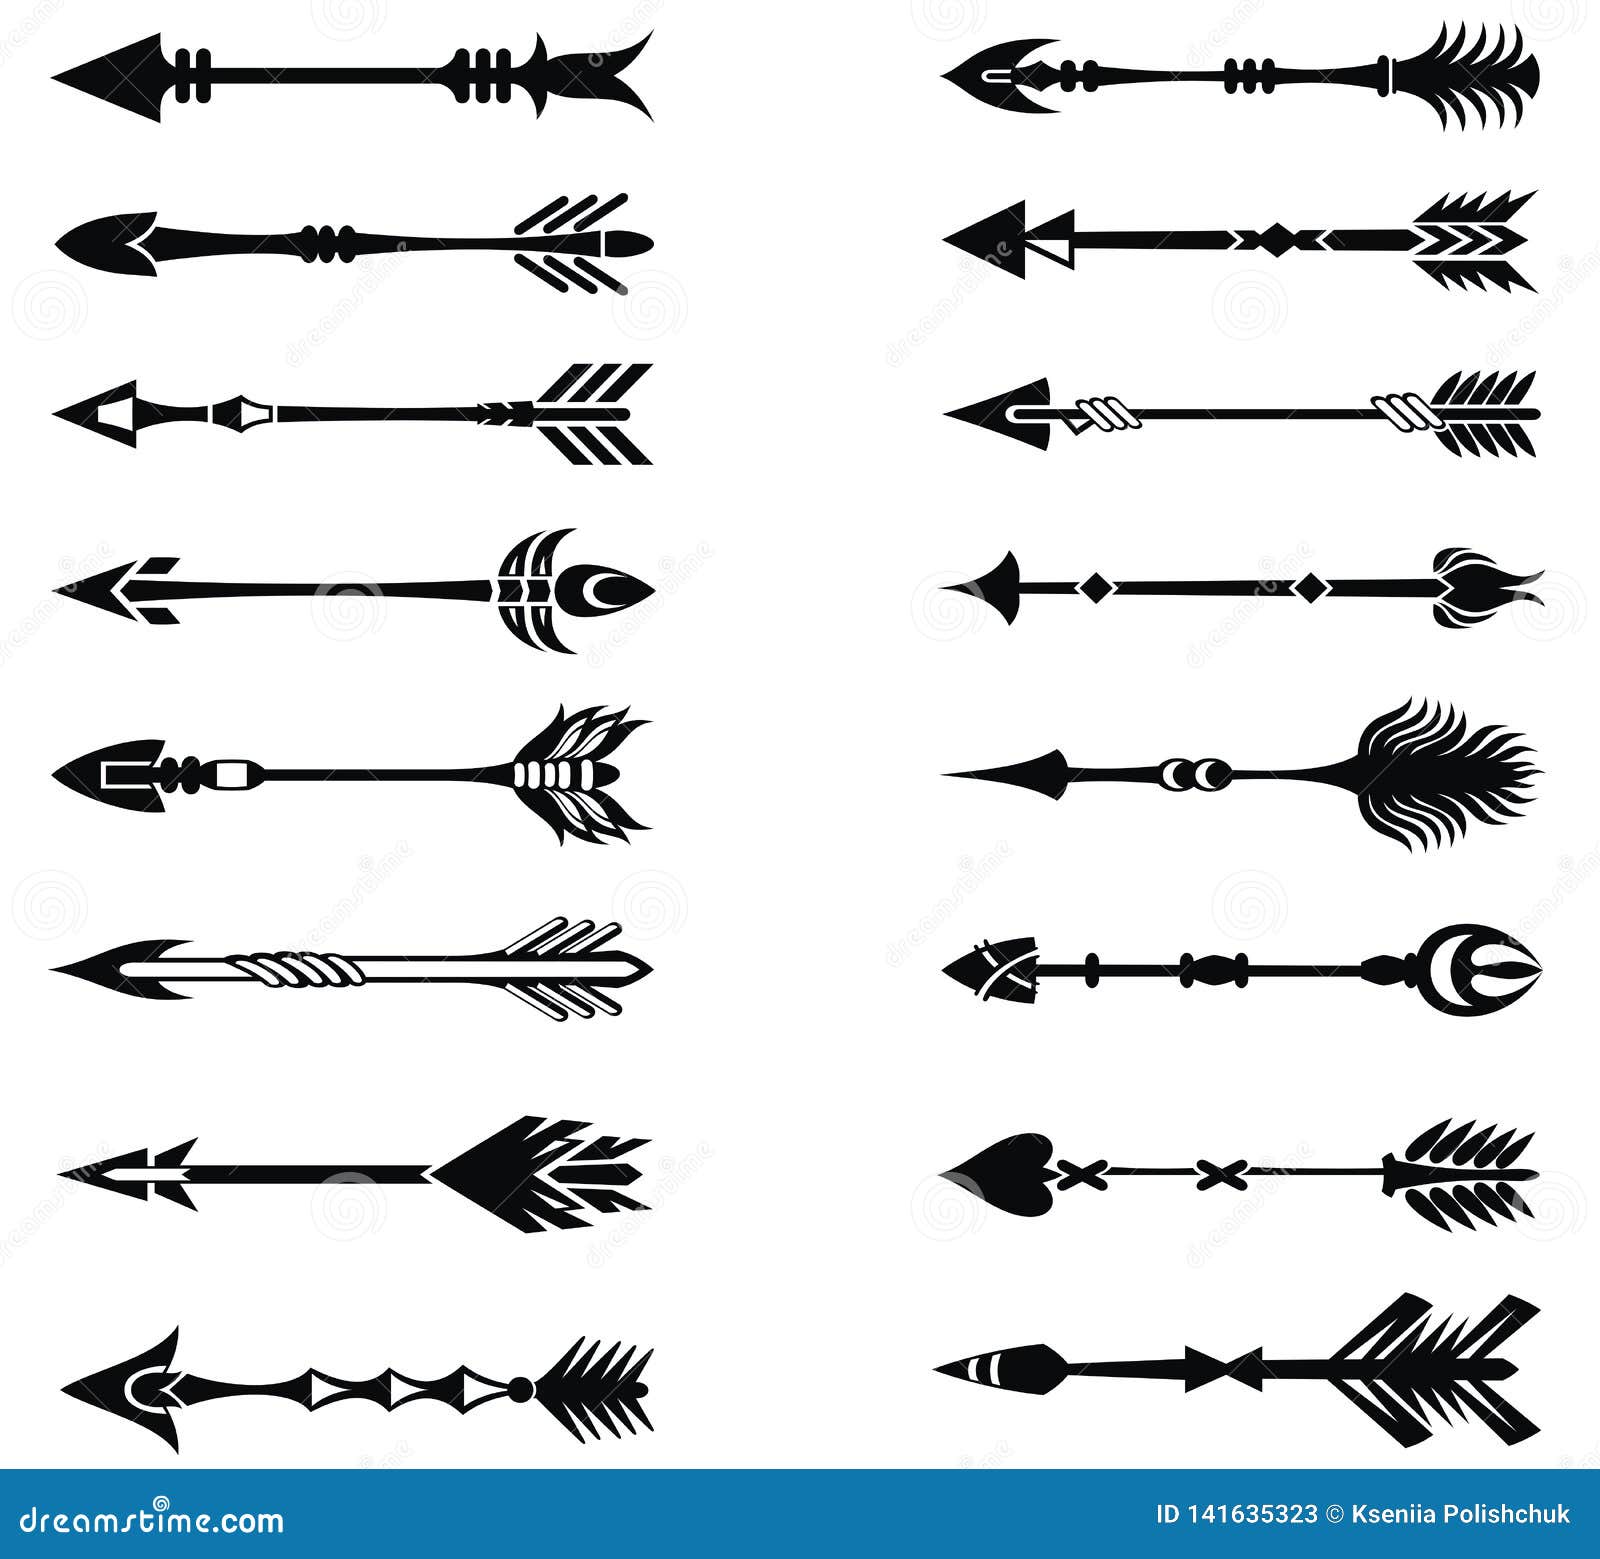 Decorative Arrow Set In Native American Indian Style